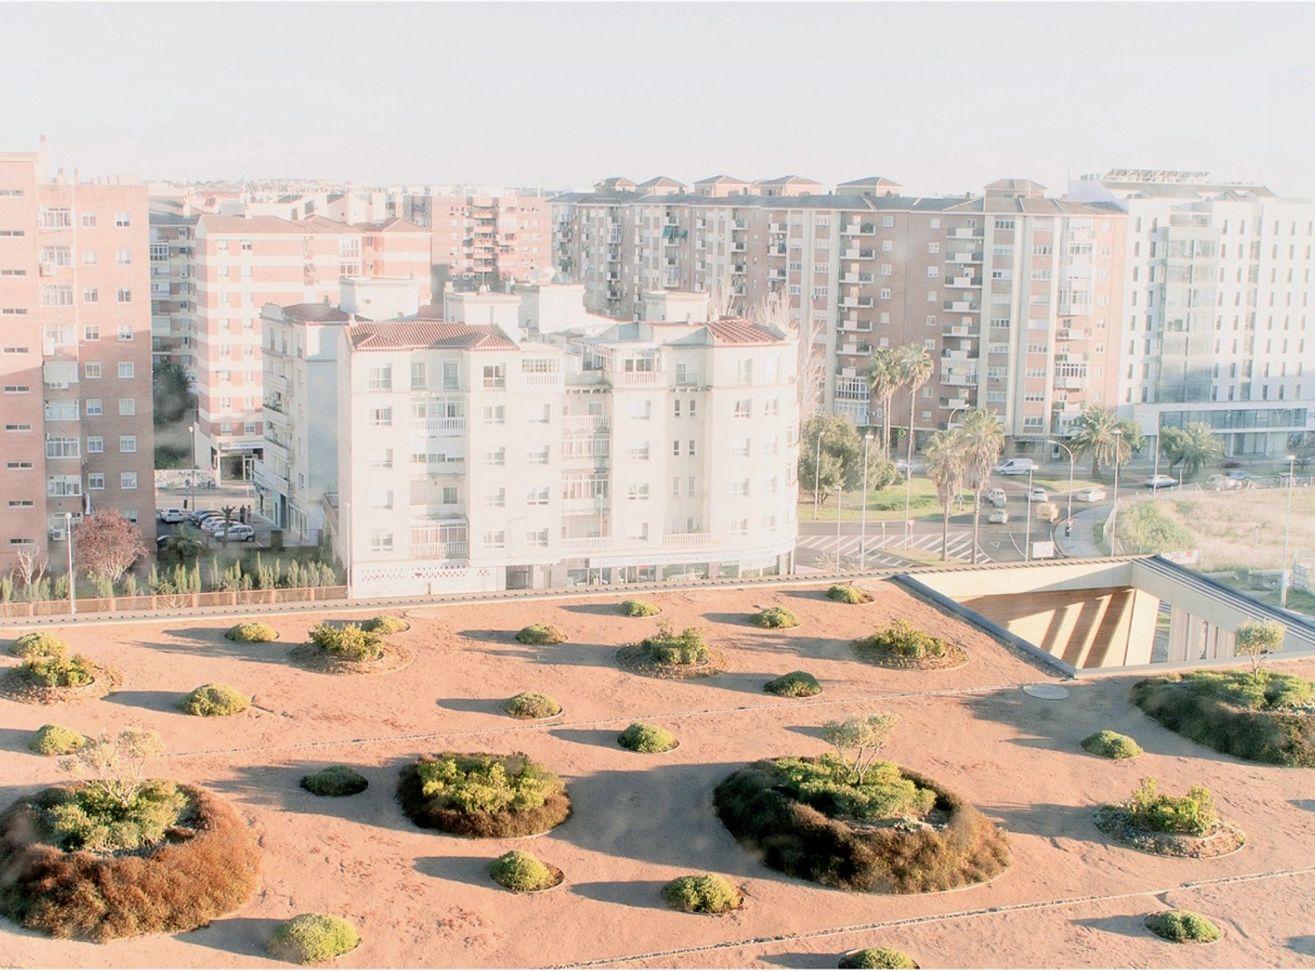 Caja Badajoz HQ Dehesa Landscape: Greenroof Cover and Gardens & Park Featured Image